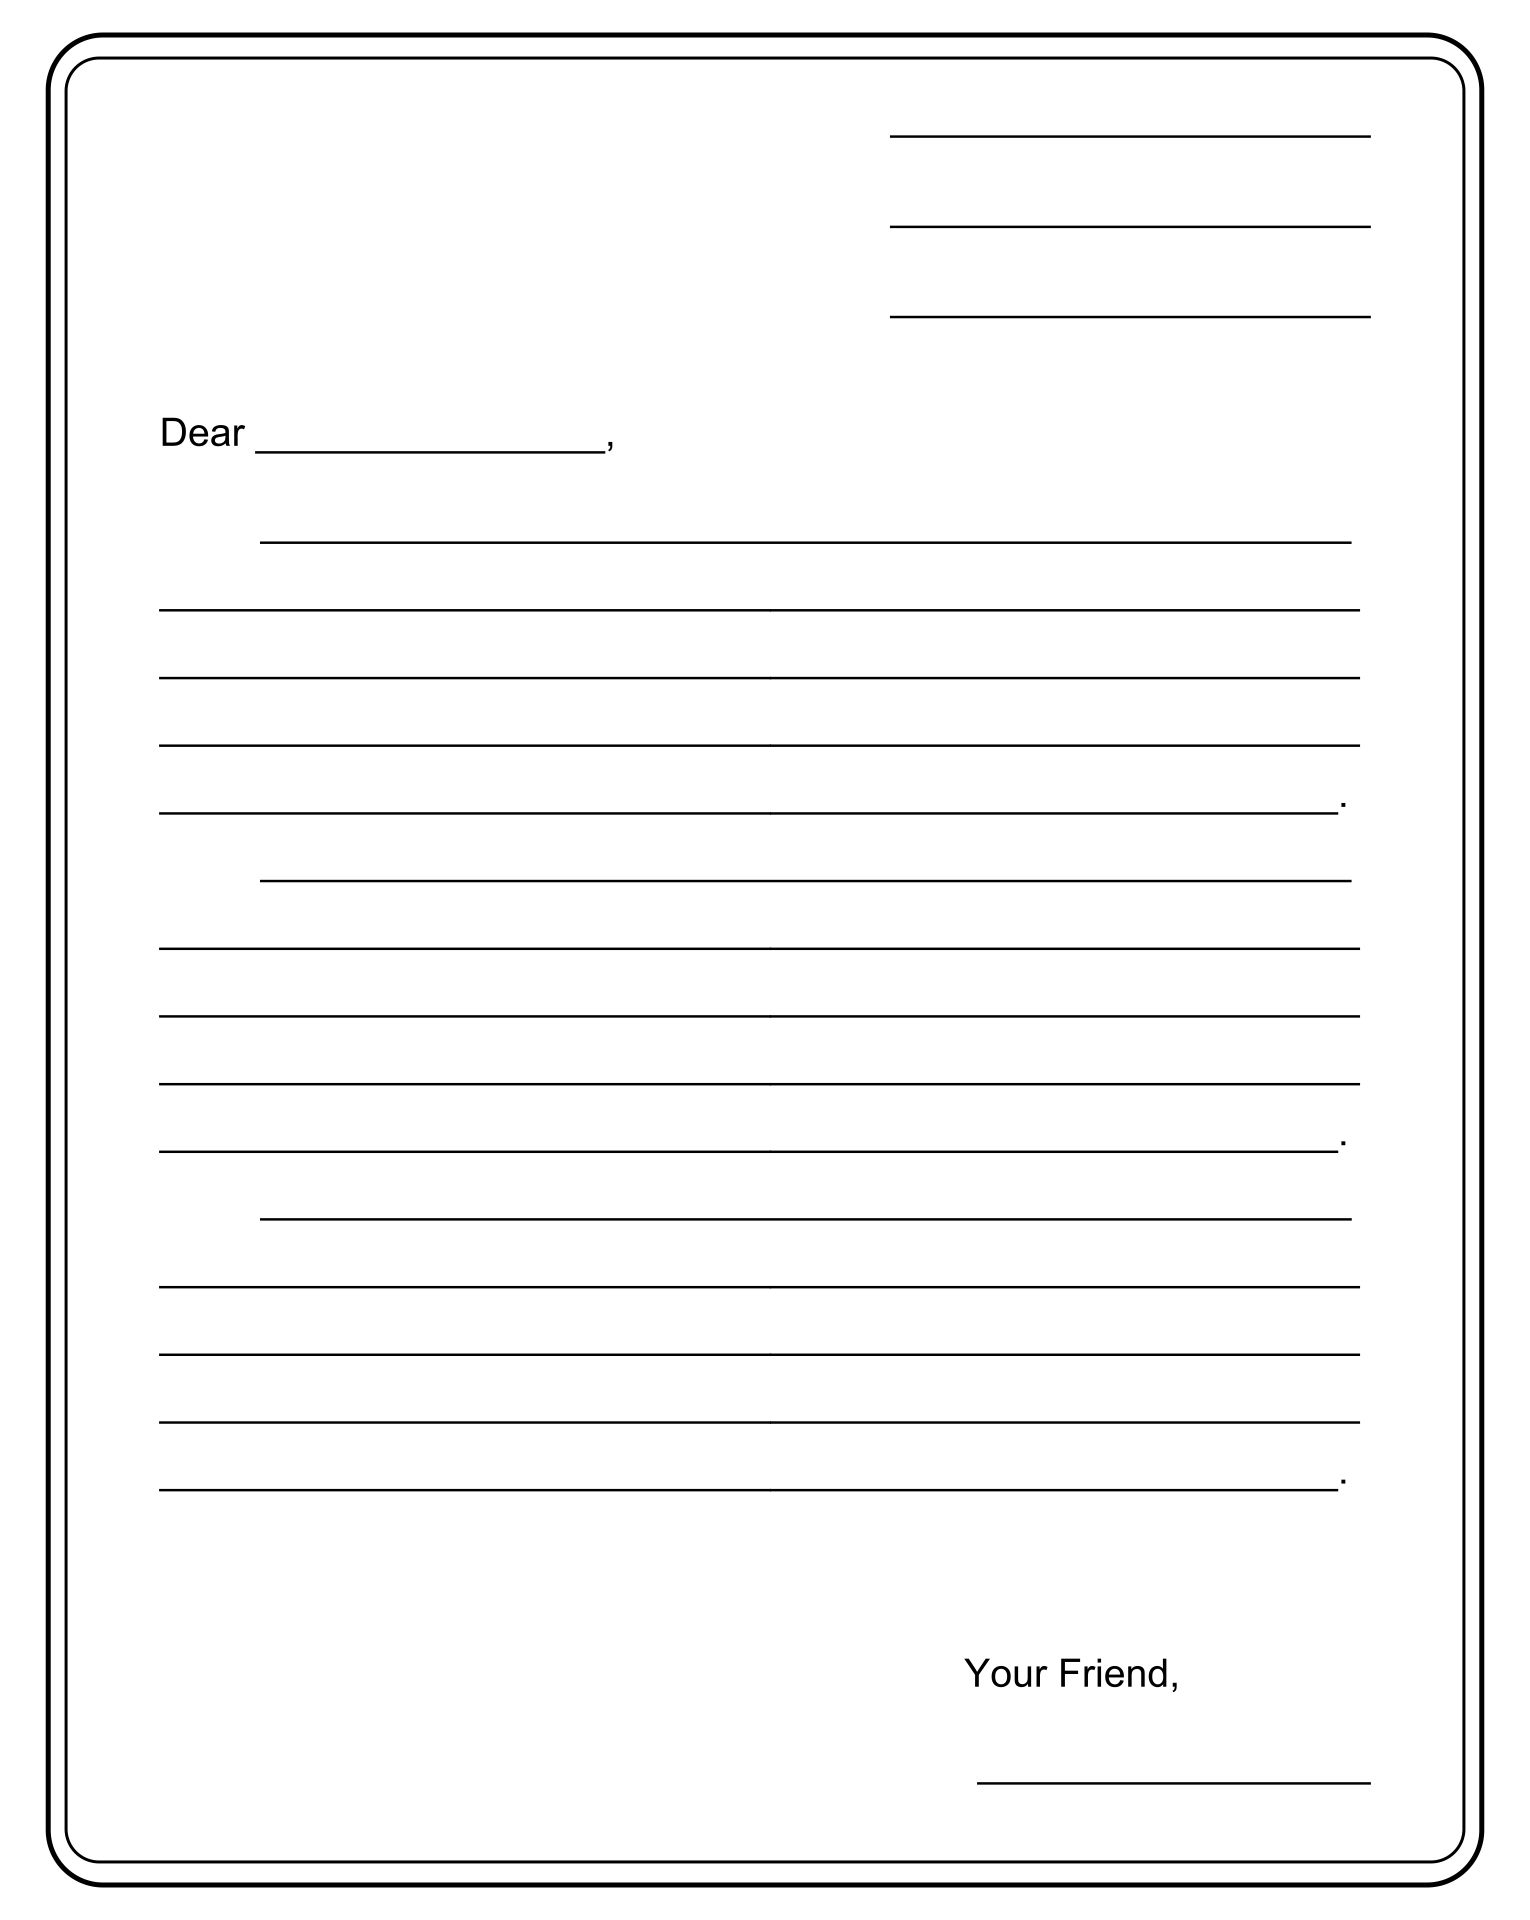 8-best-images-of-printable-blank-letter-template-letter-writing-template-blank-letter-format